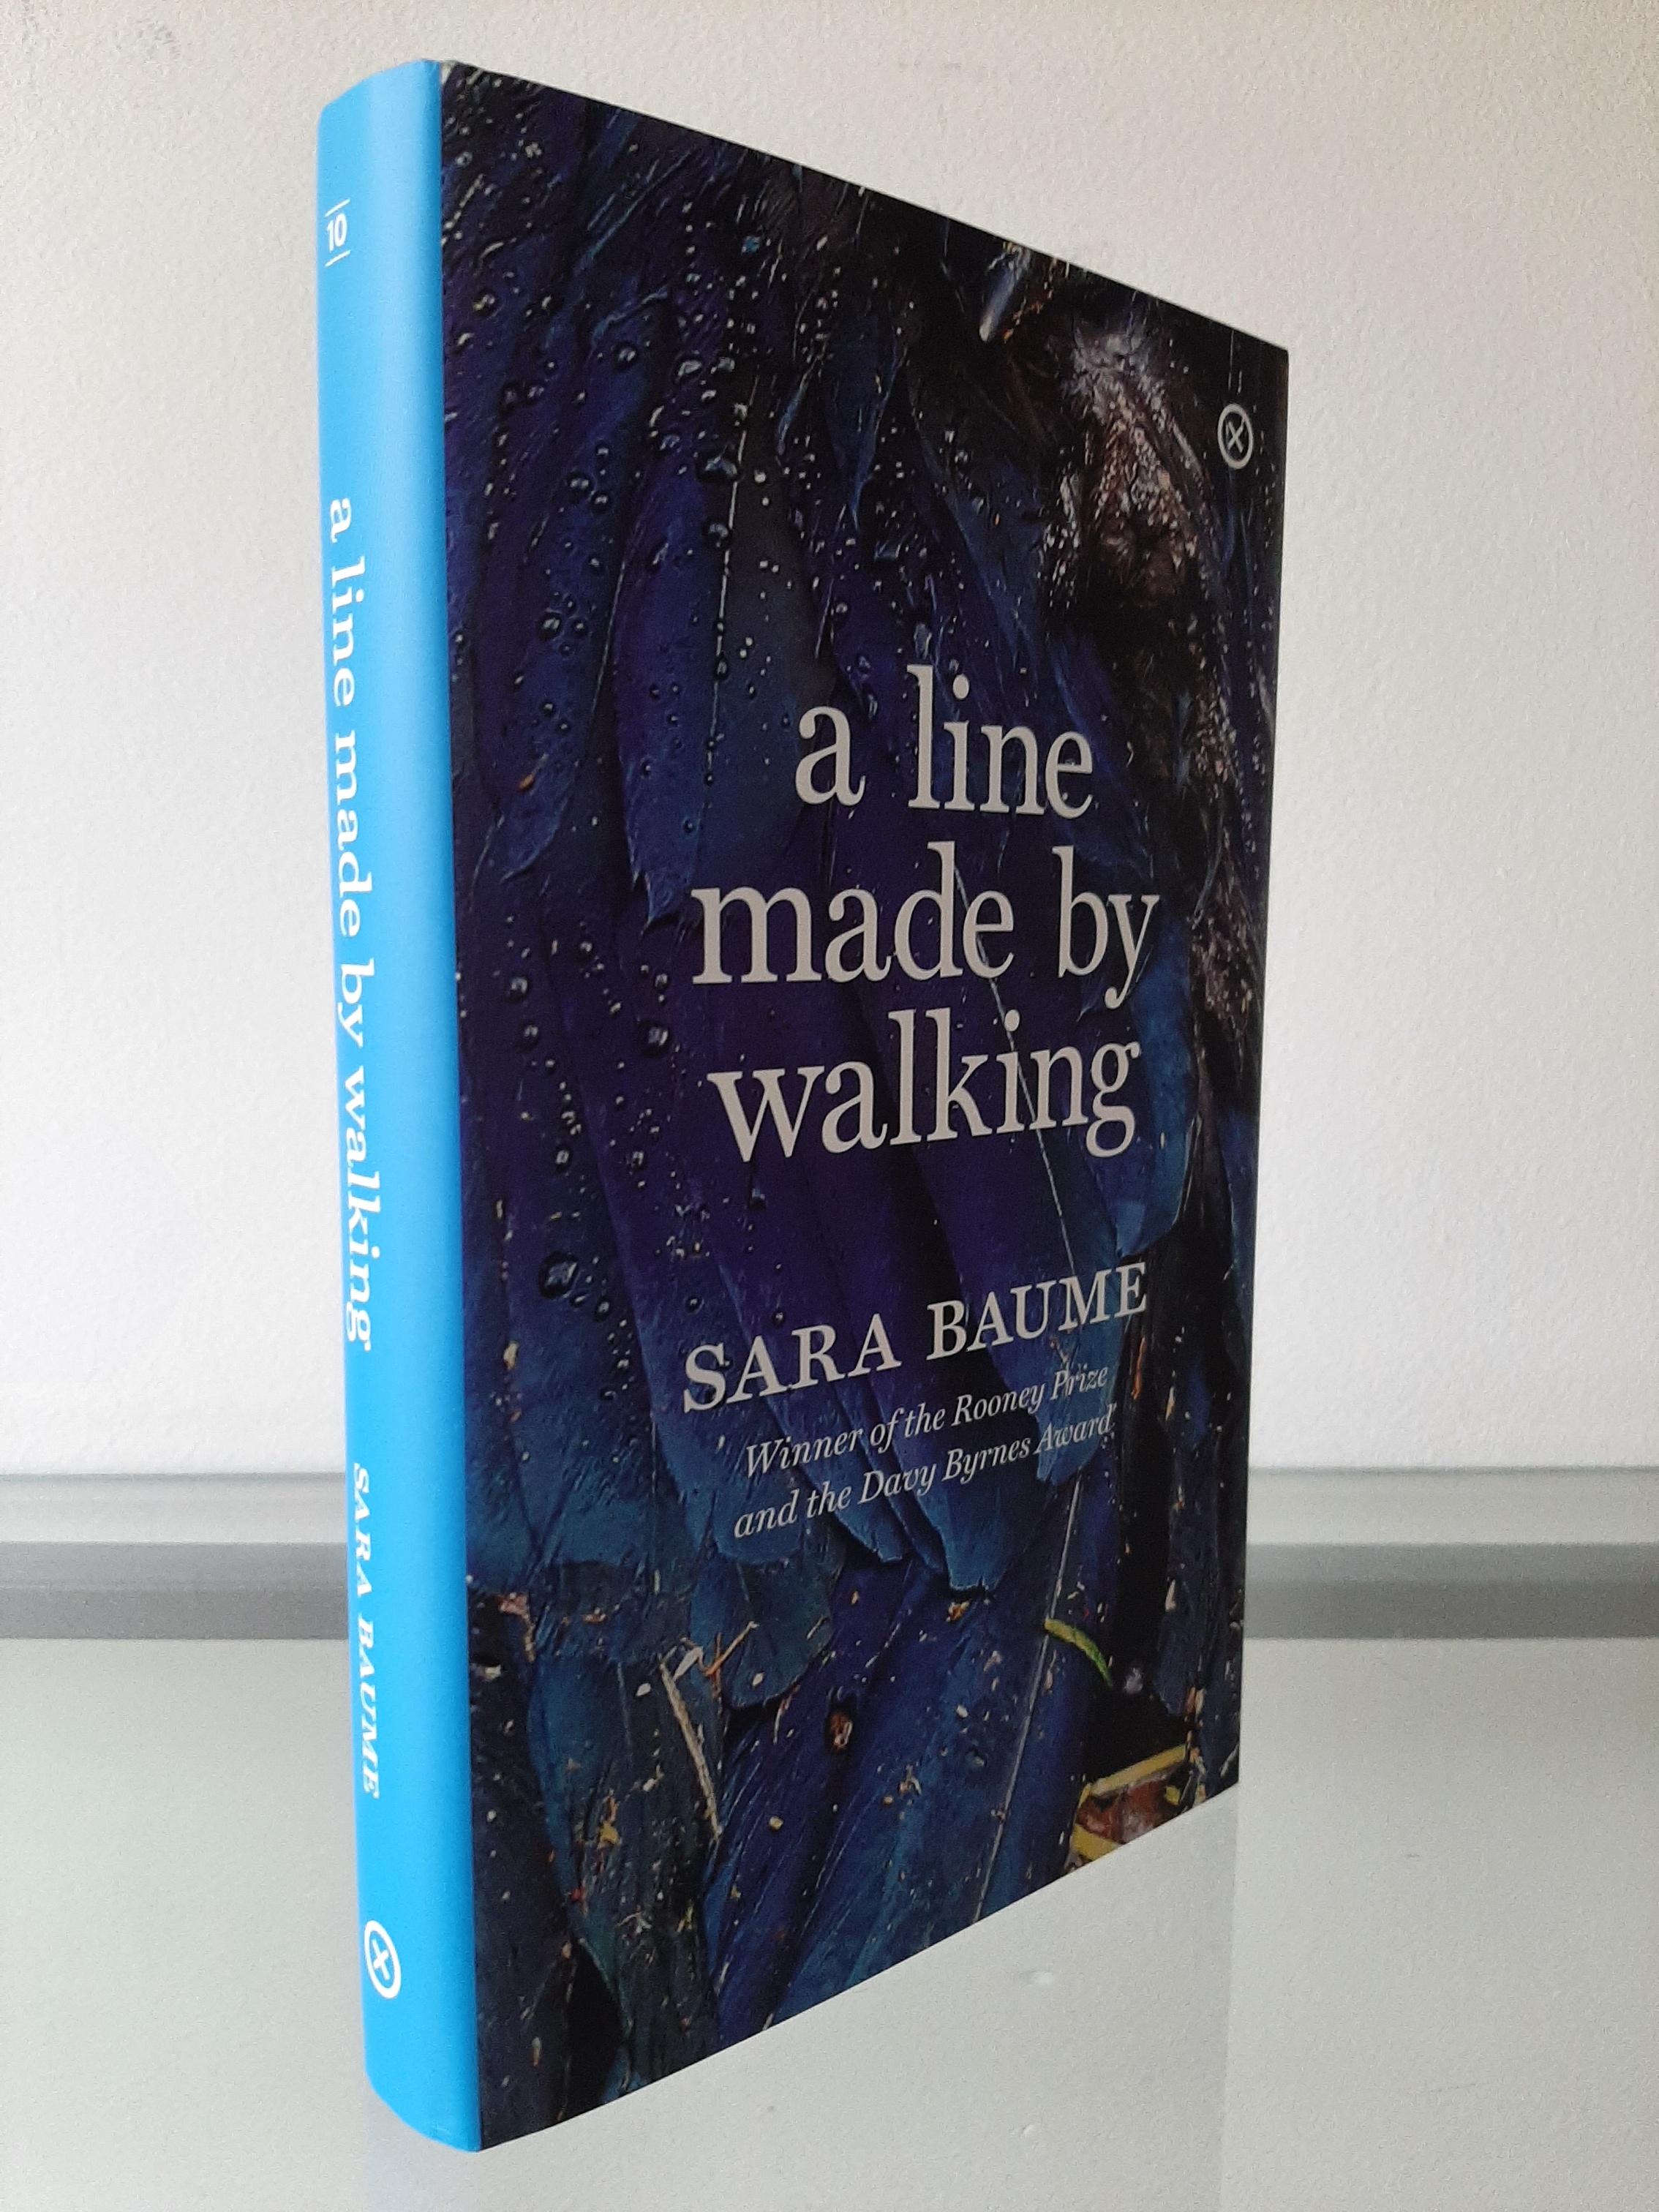 A Line Made by Walking by Sara Baume: Fine (2017) Signed by Author(s) |